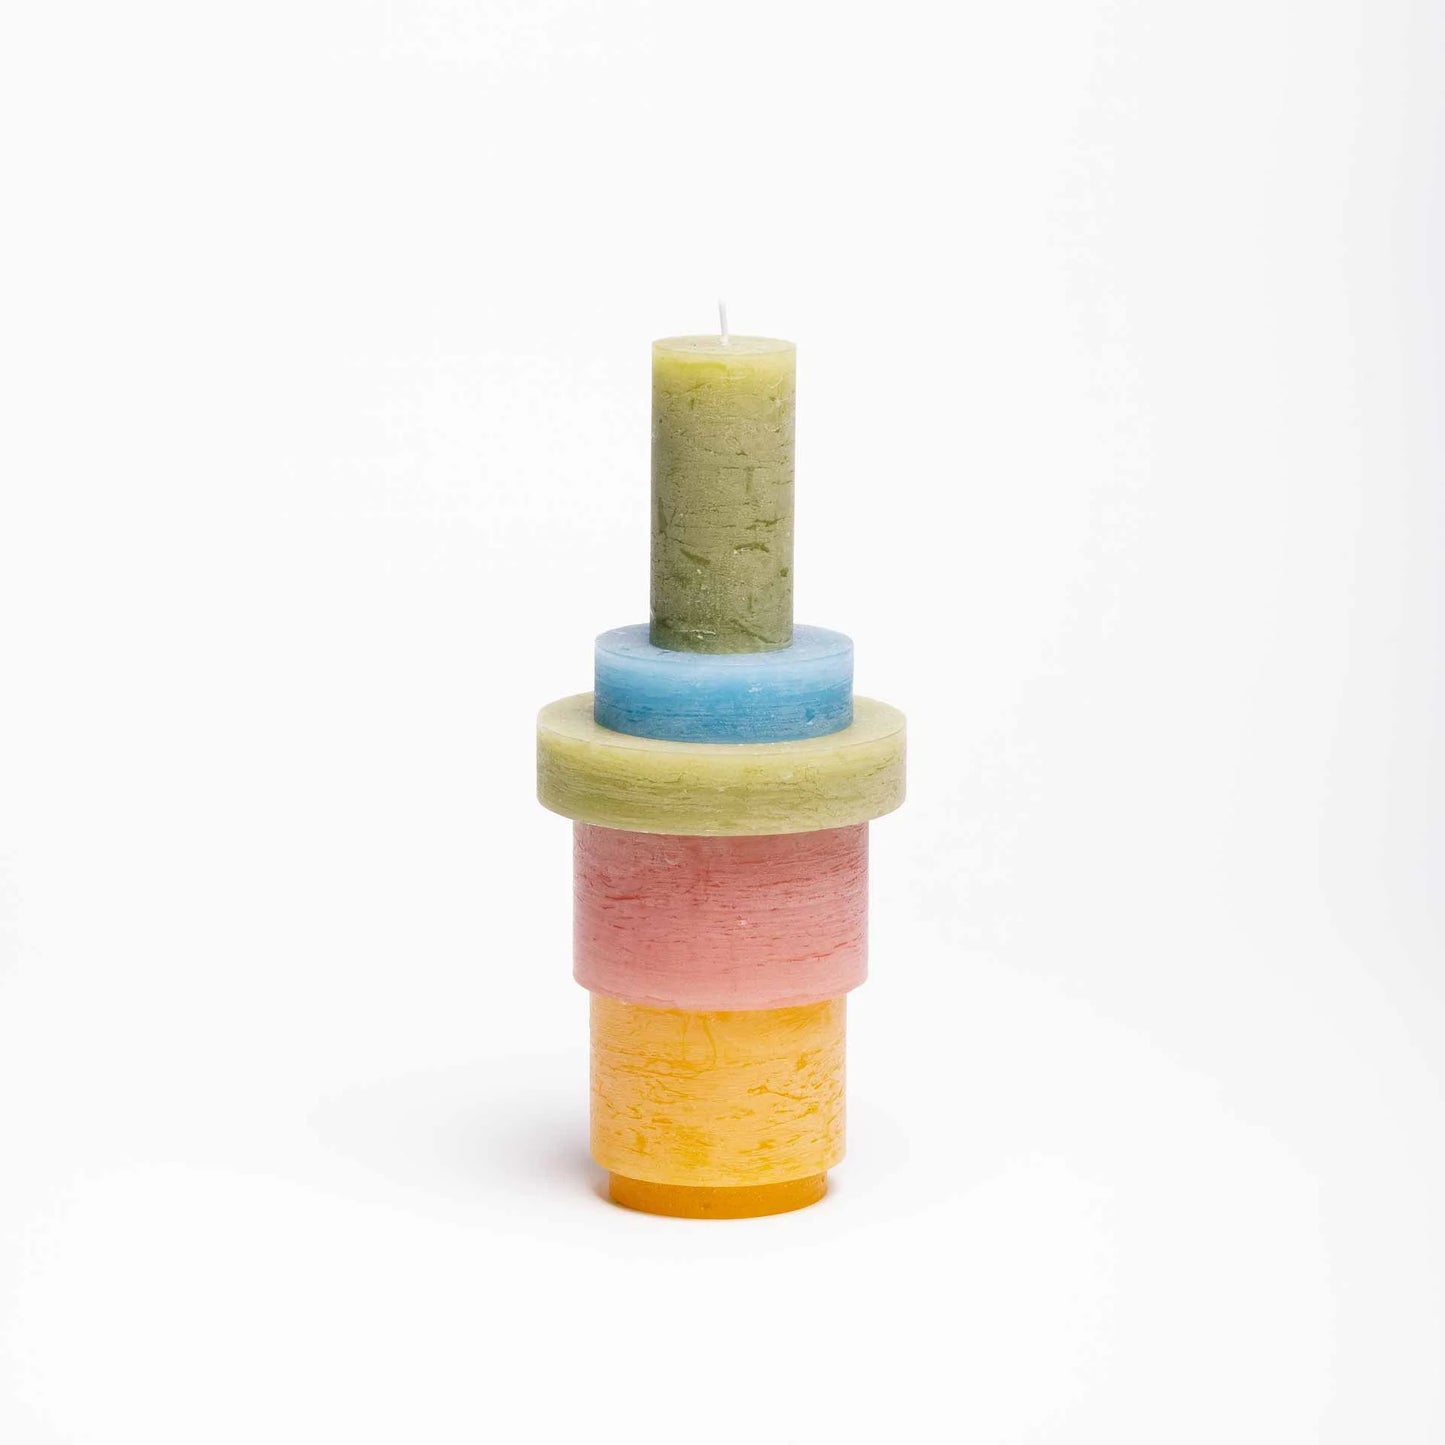 Candl Stack 03 - Pink & Yellow